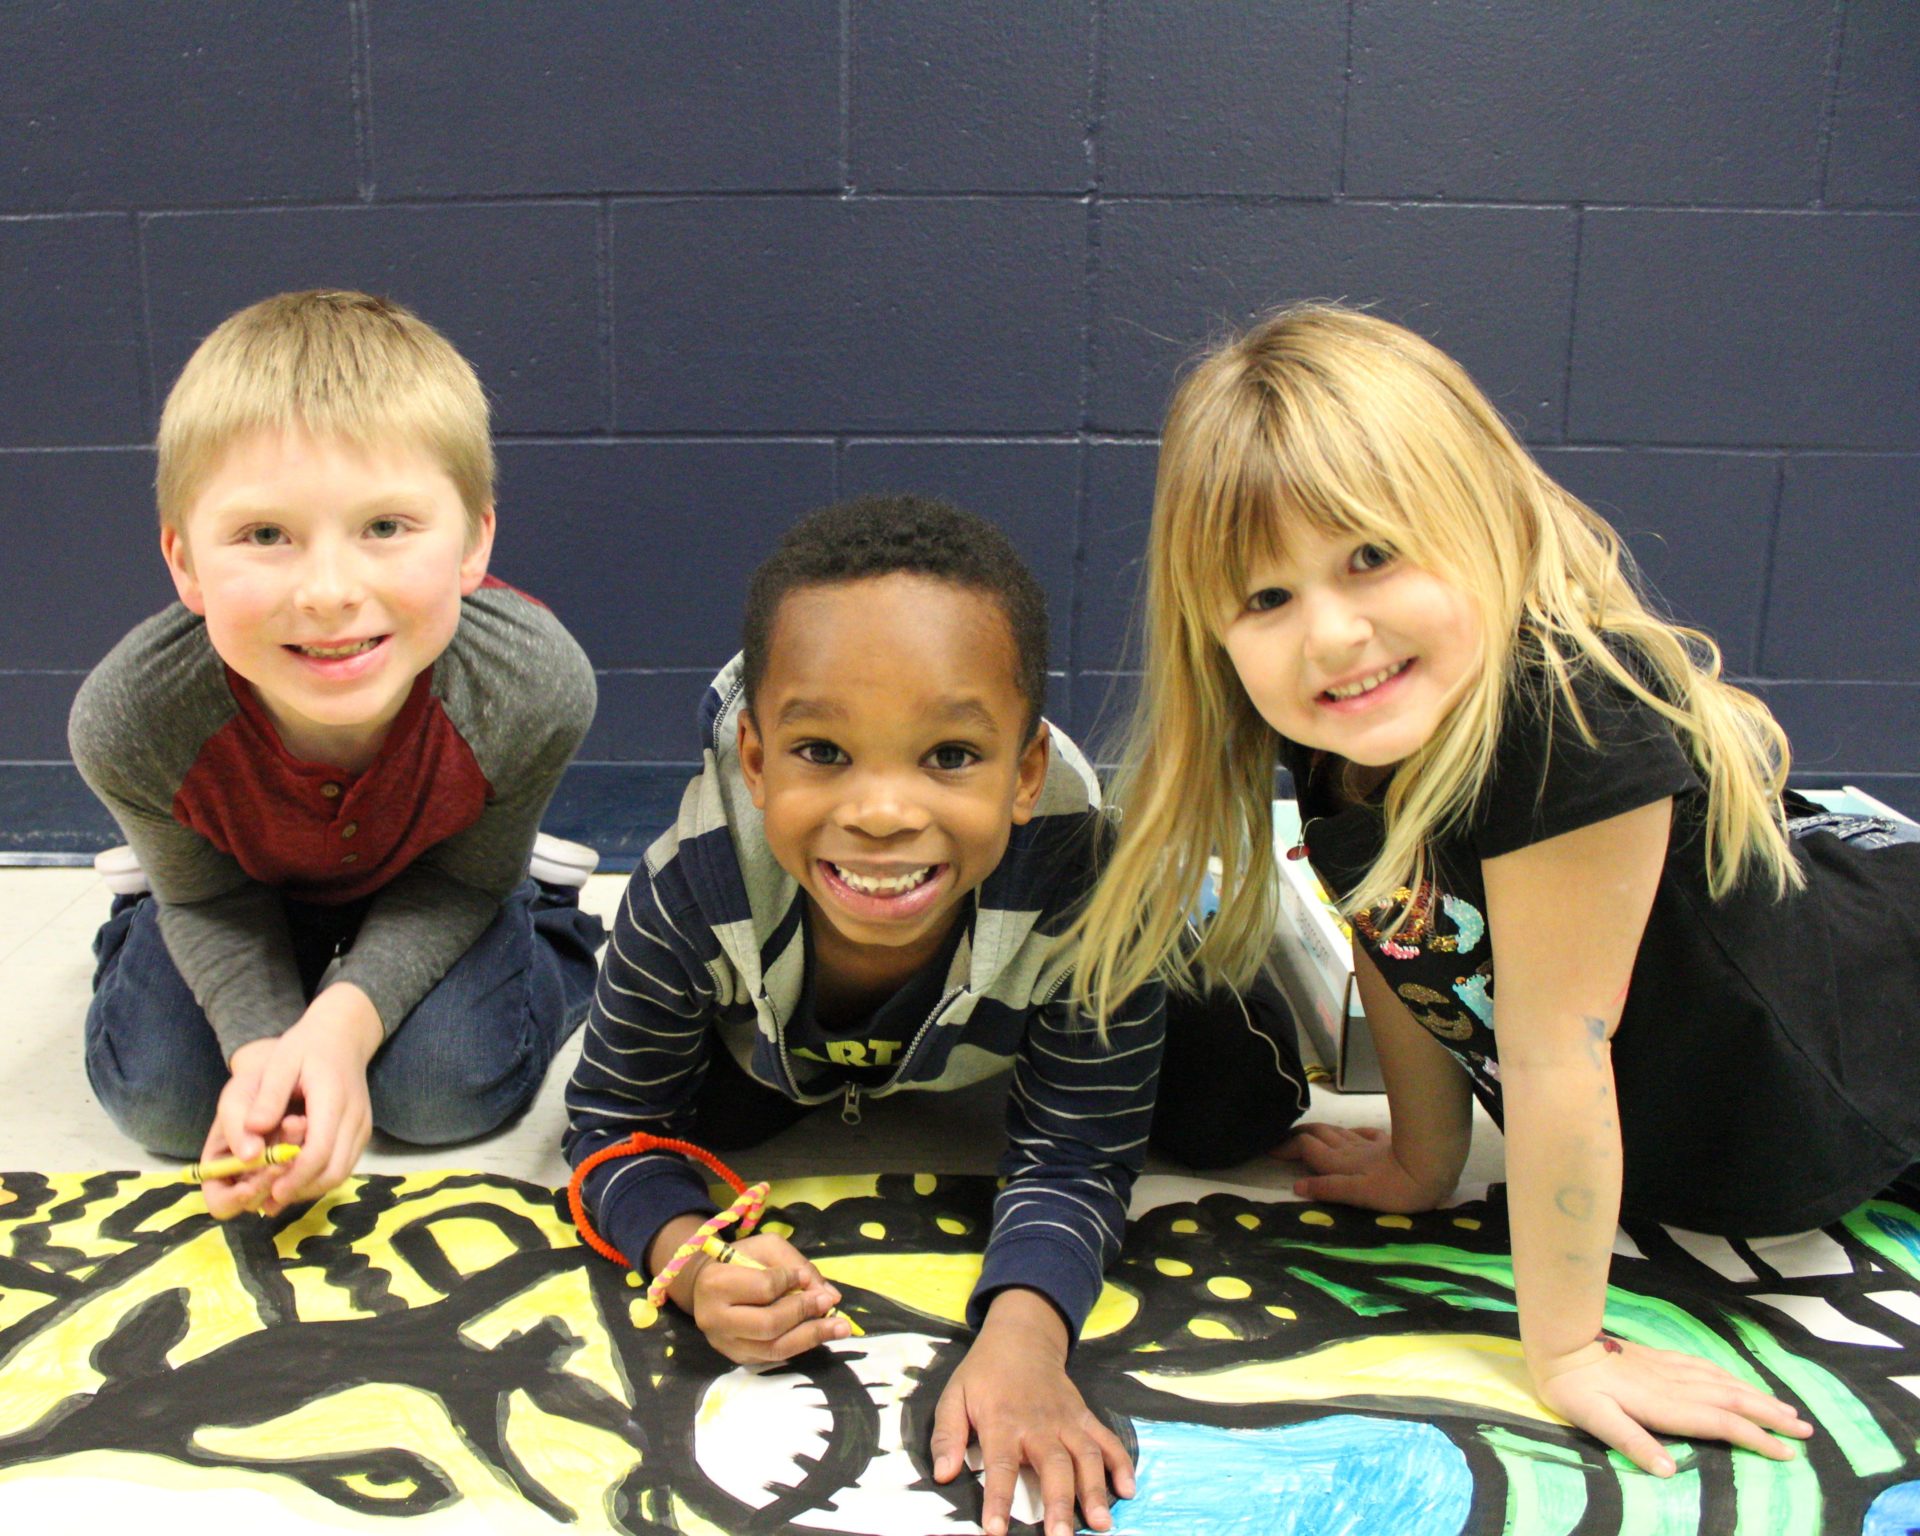 Three students smile as they color on the floor banner.